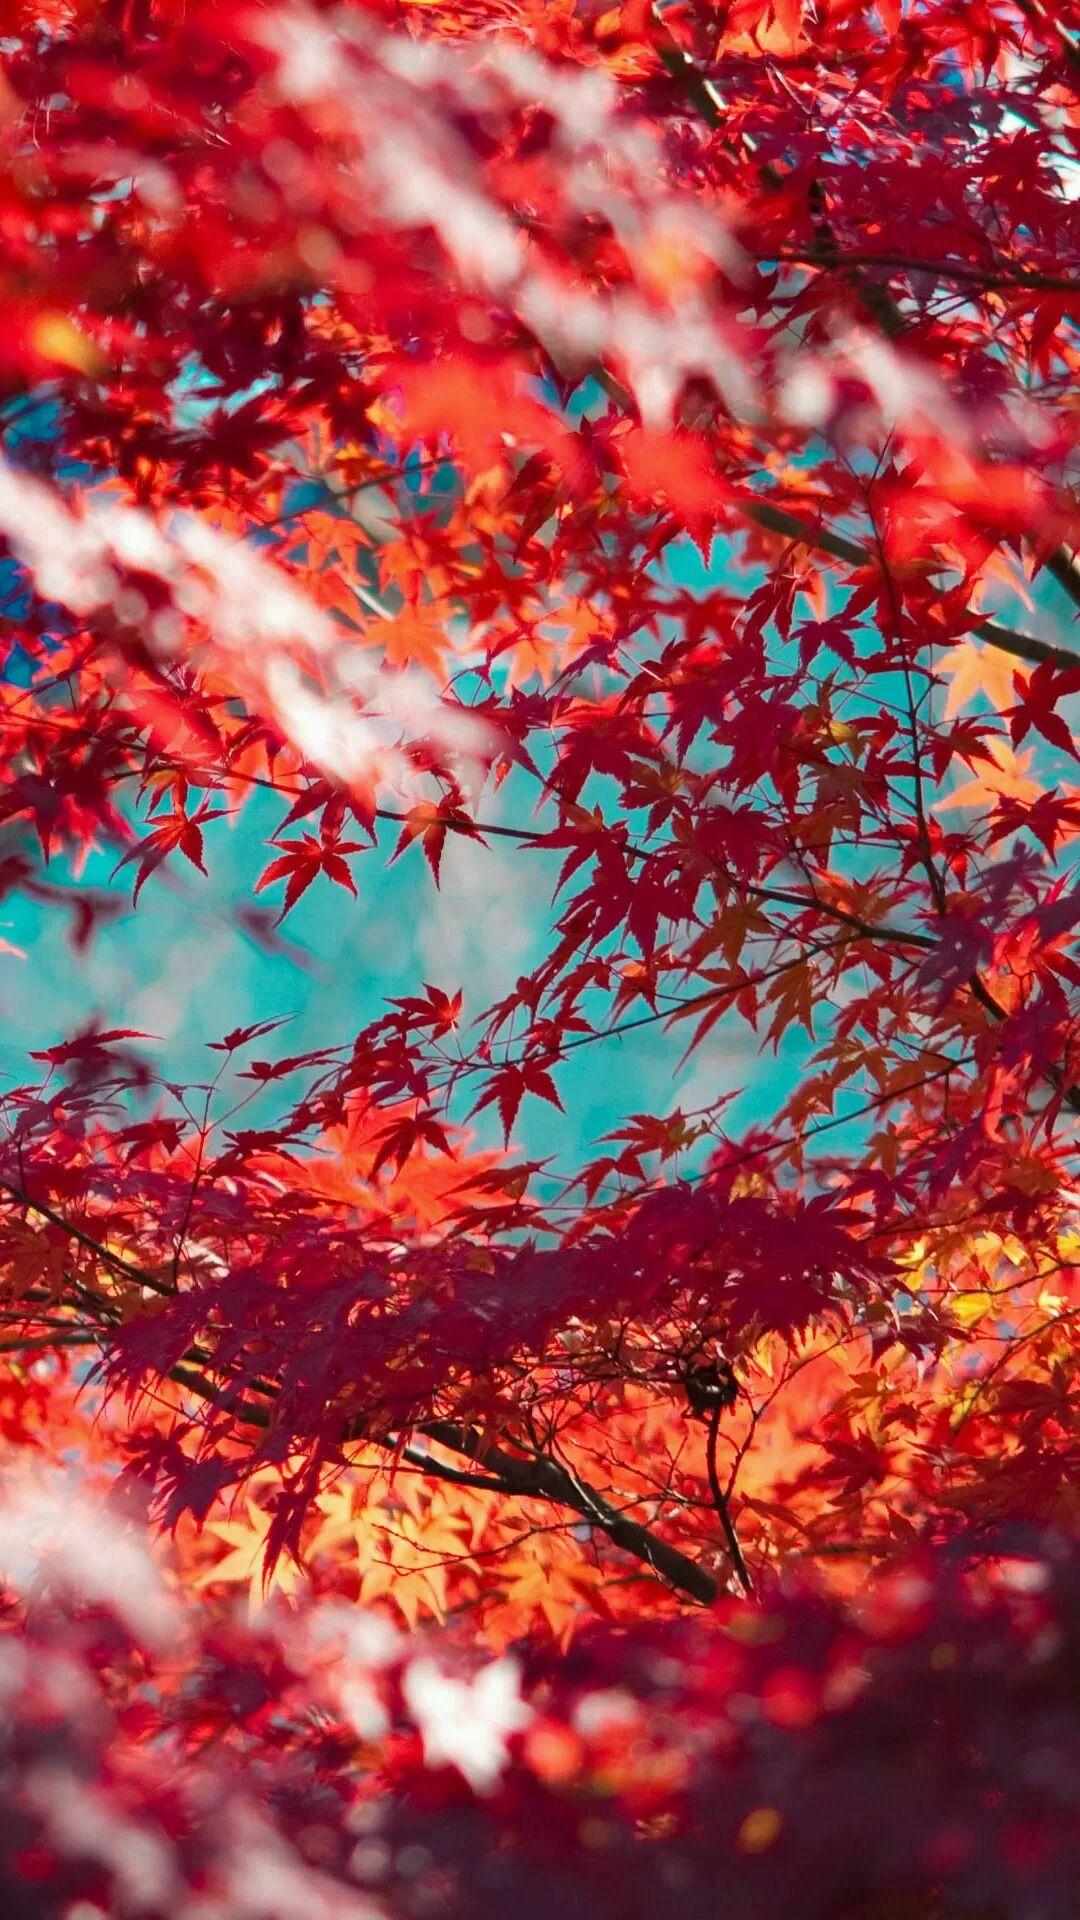 Beautiful Red Maple Leaves iPhone wallpaper. Tap to see more Fall